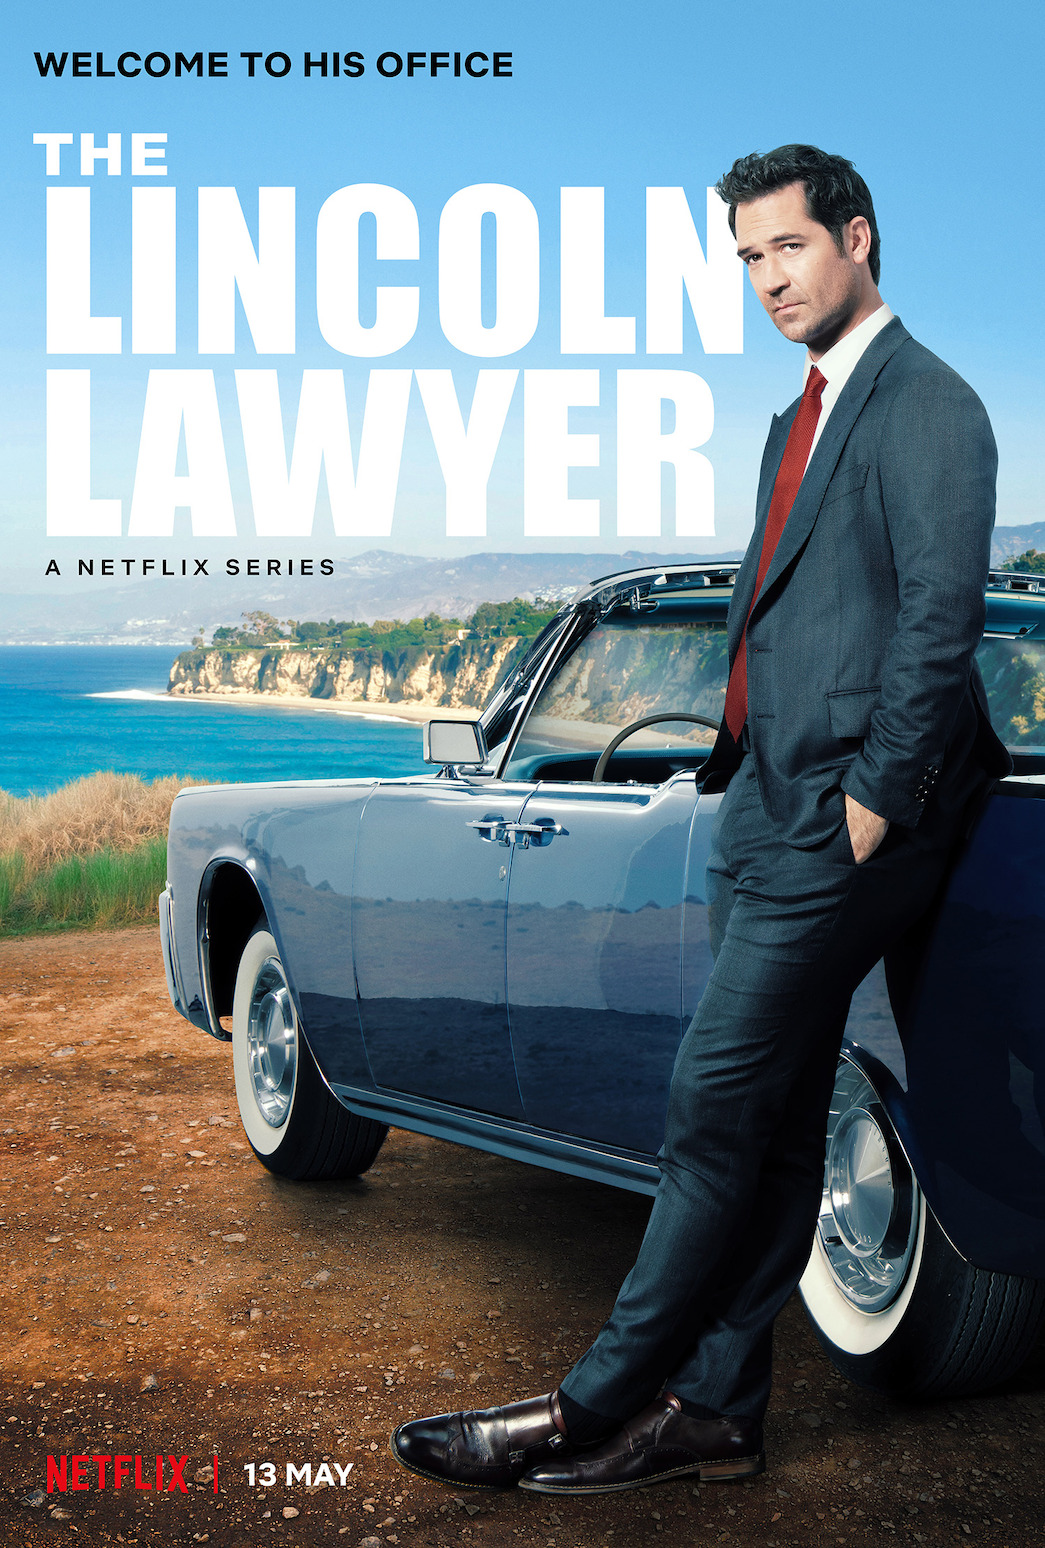 The Lincoln Lawyer S01 PROPER 1080p NF WEBRip DDPA5 1 x264-TBD Multi Subs-Incl  NL Subs